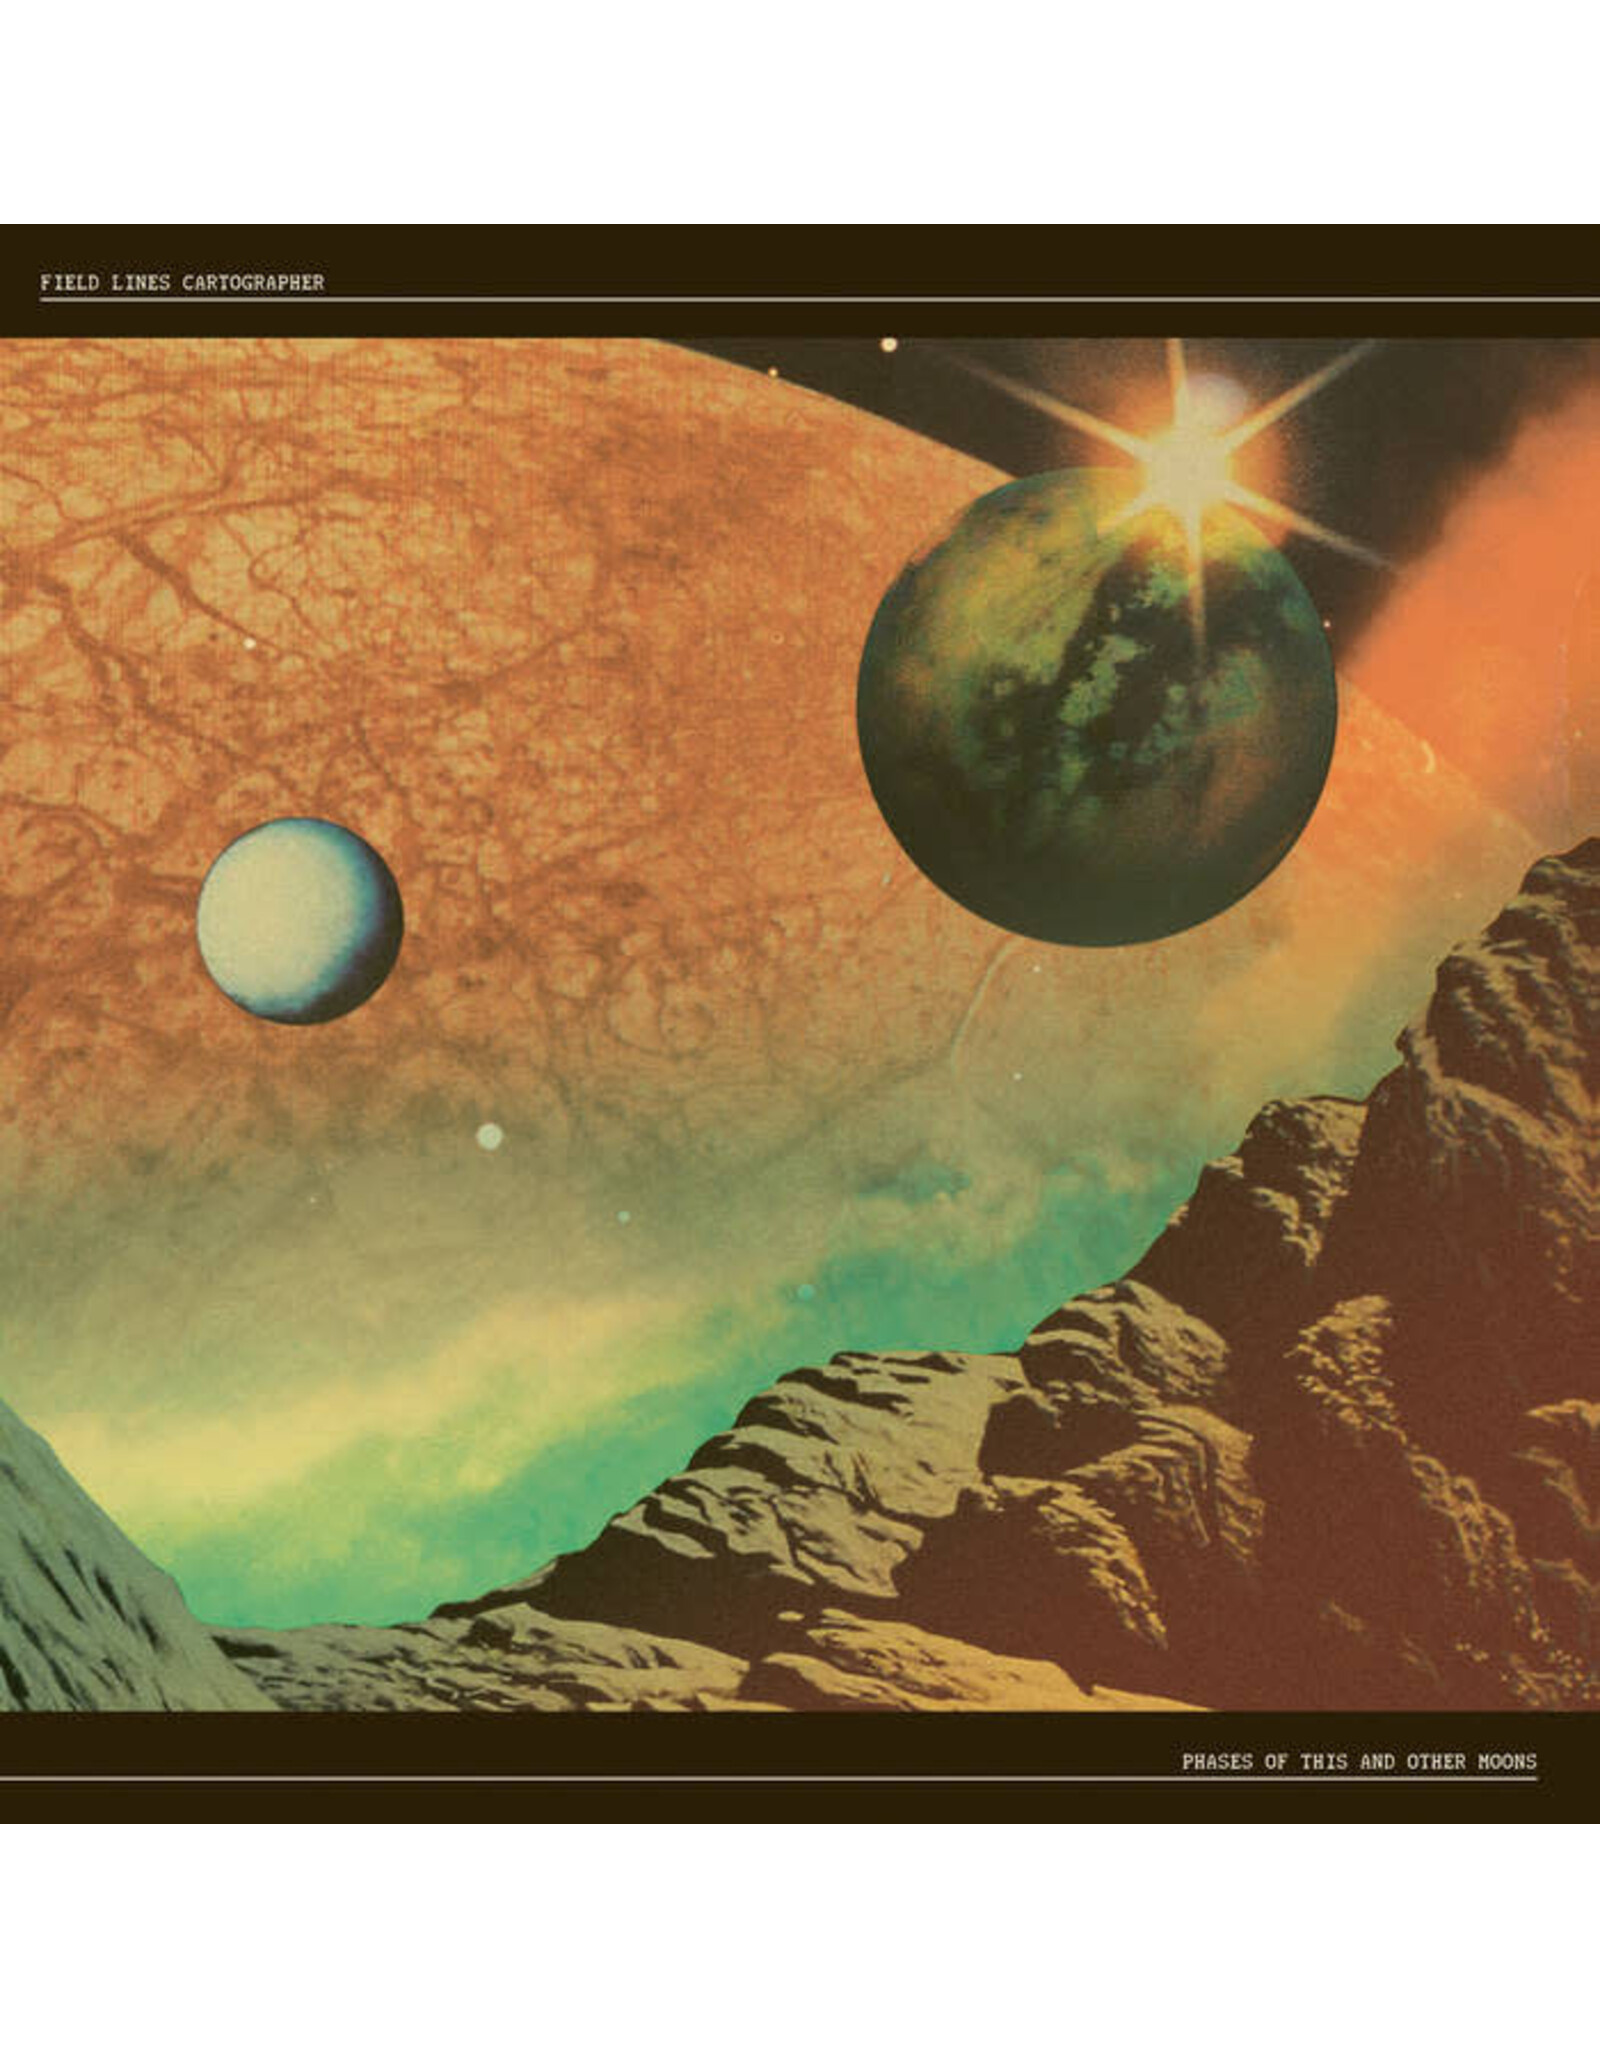 Castles In Space Field Lines Cartographer: Phases of This and Other Moons LP